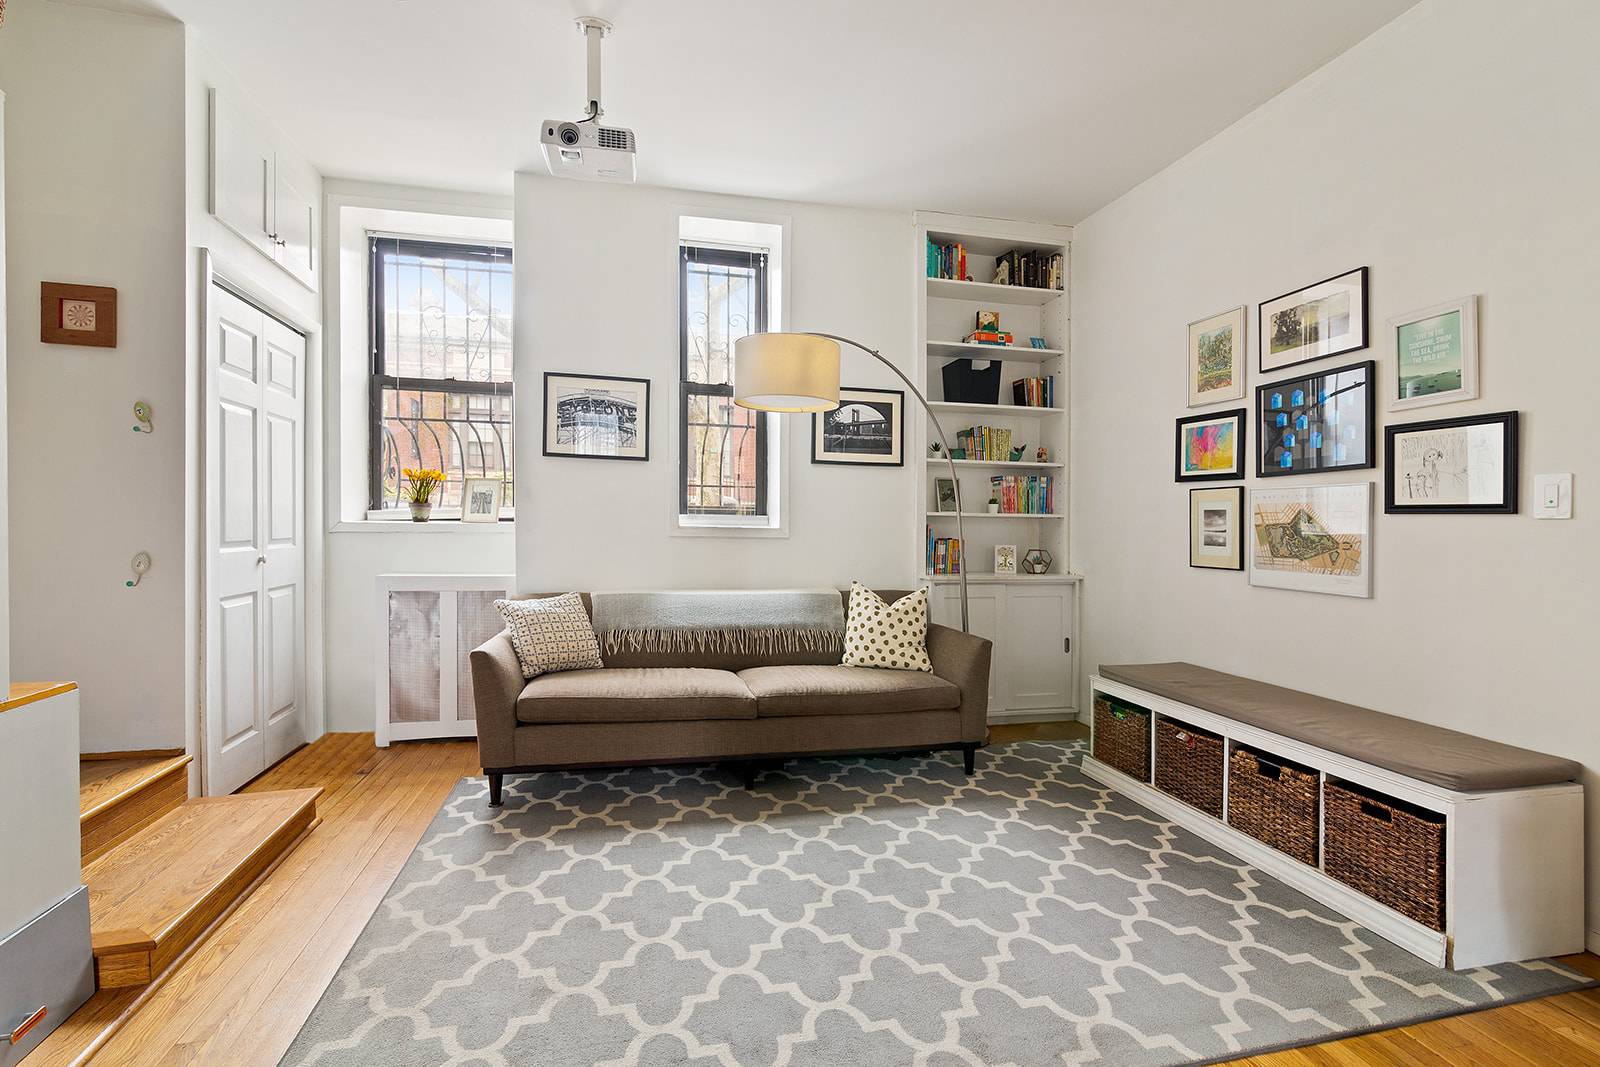 Centrally located in Park Slope, this updated two bedroom, one bath co op is poised to welcome you home.